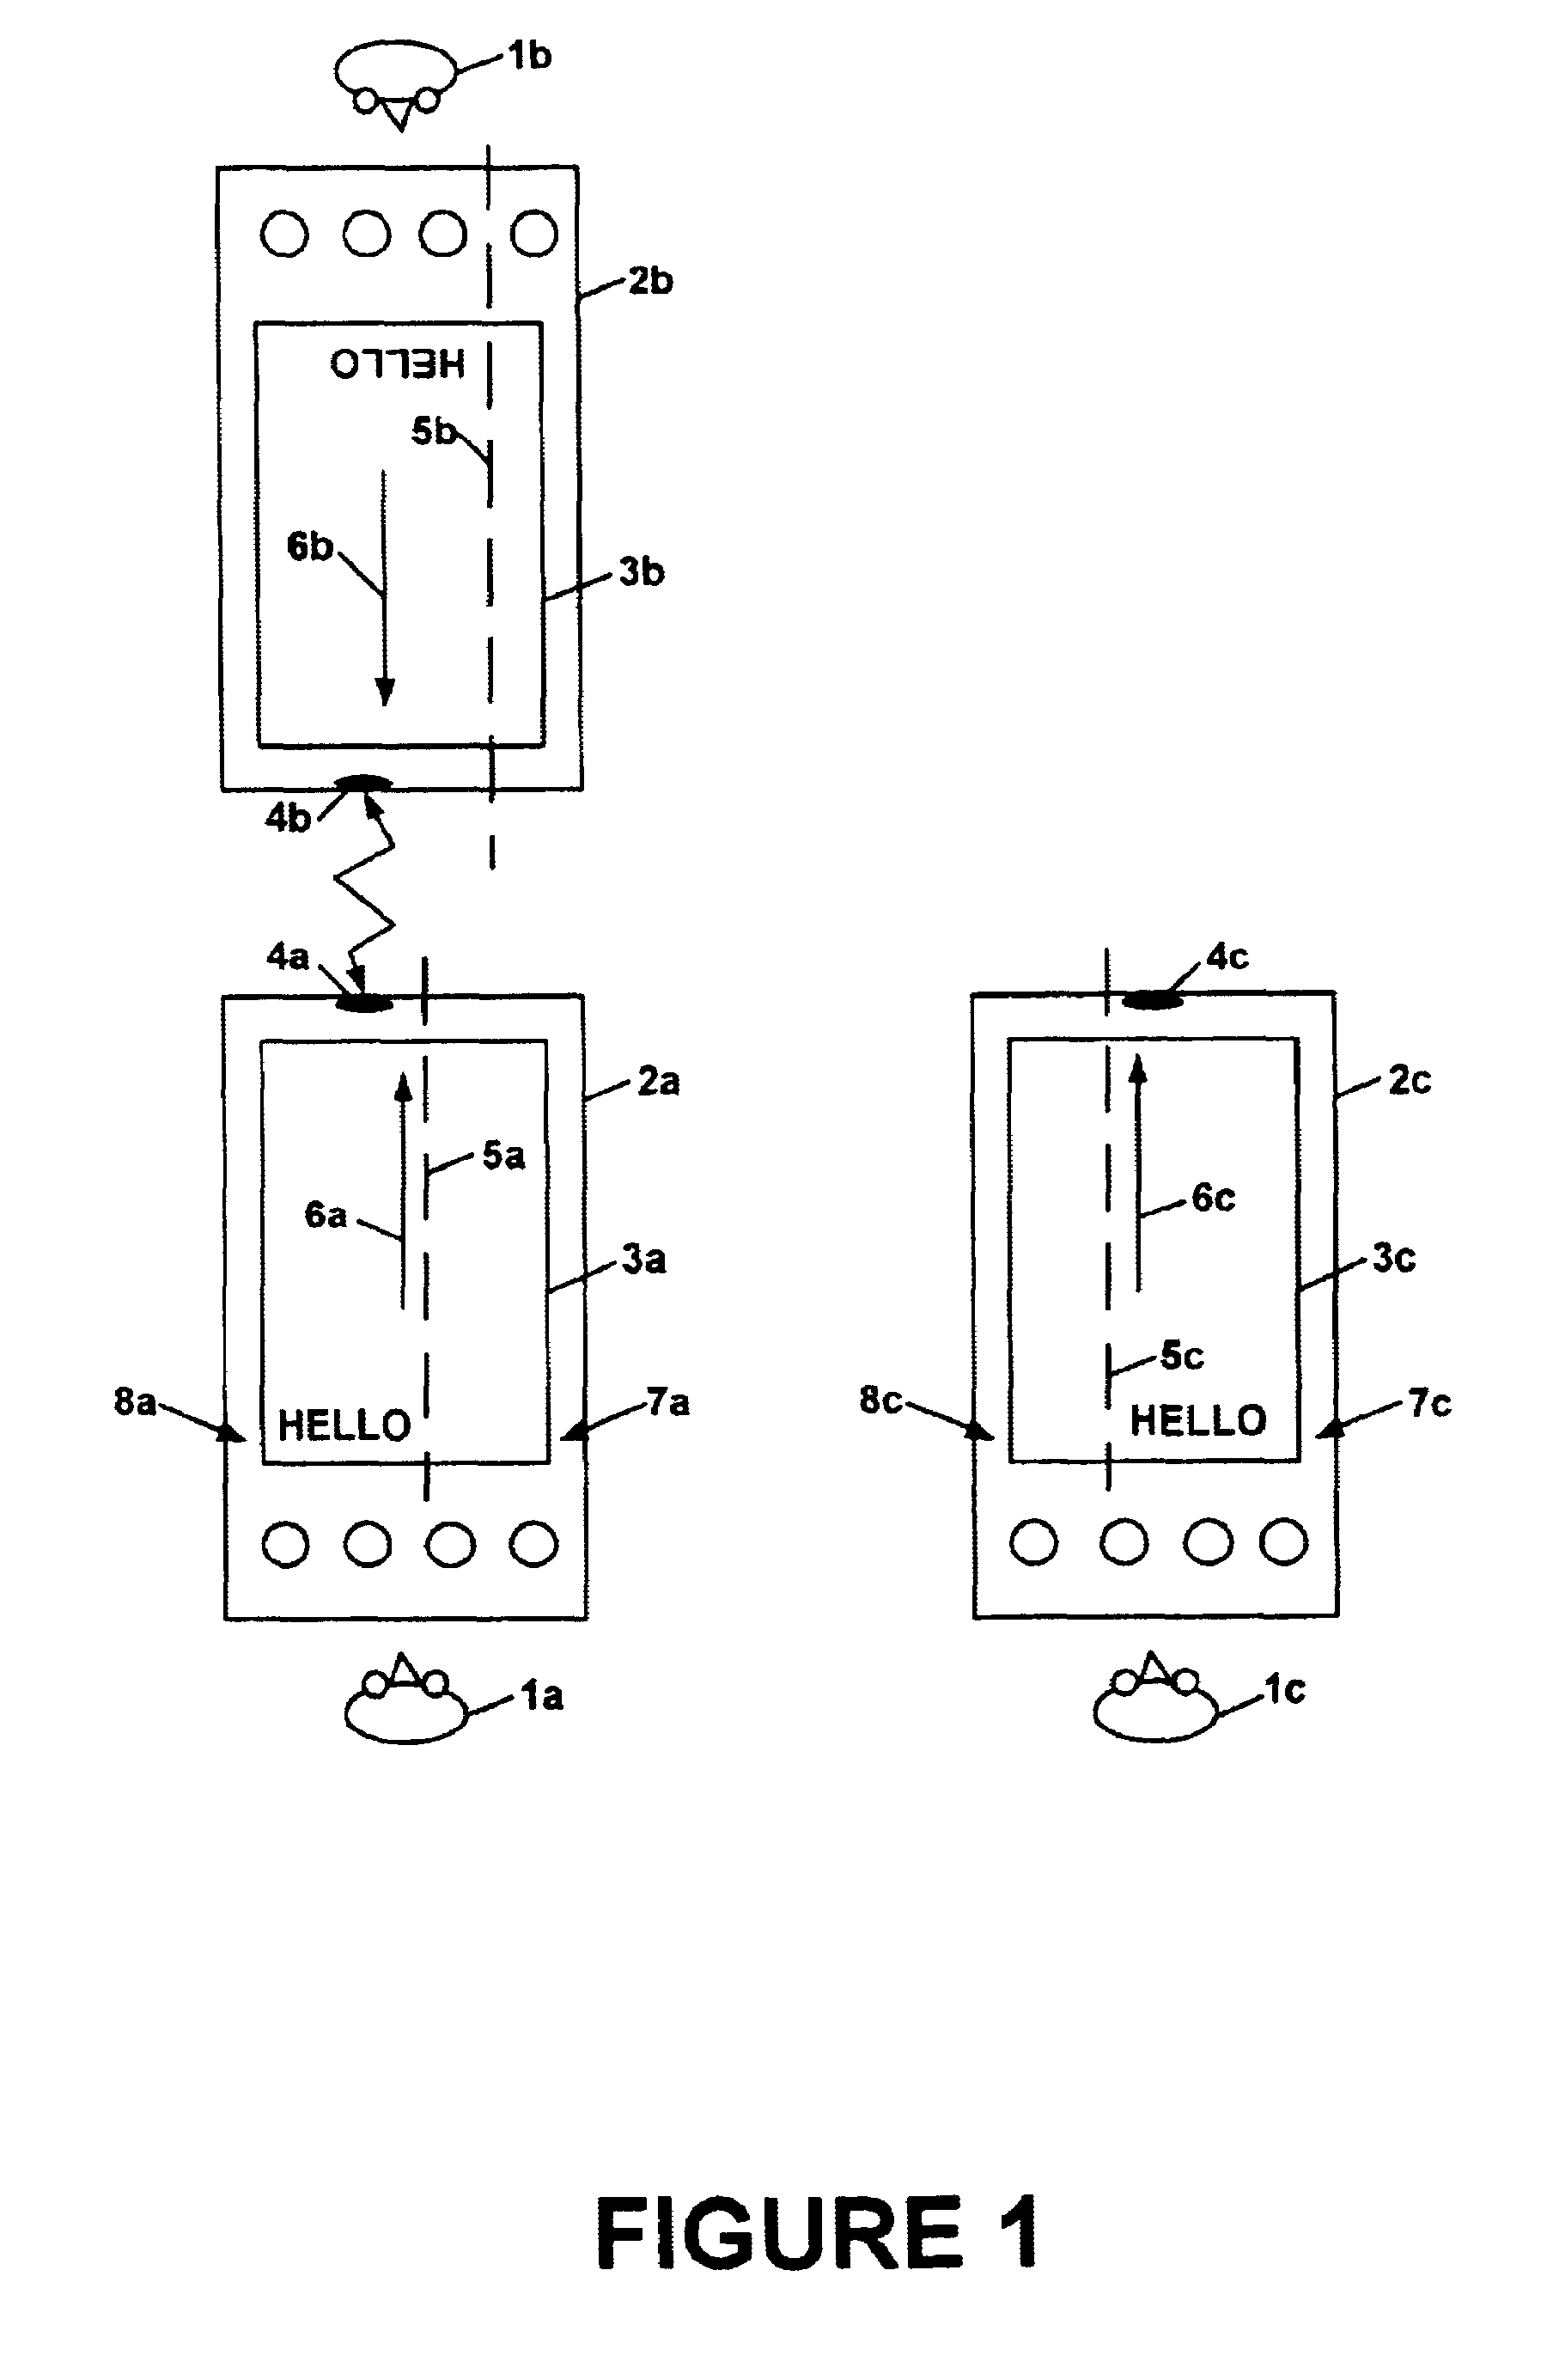 Portable electronic system having multiple display modes for reorienting the display of data on a display screen